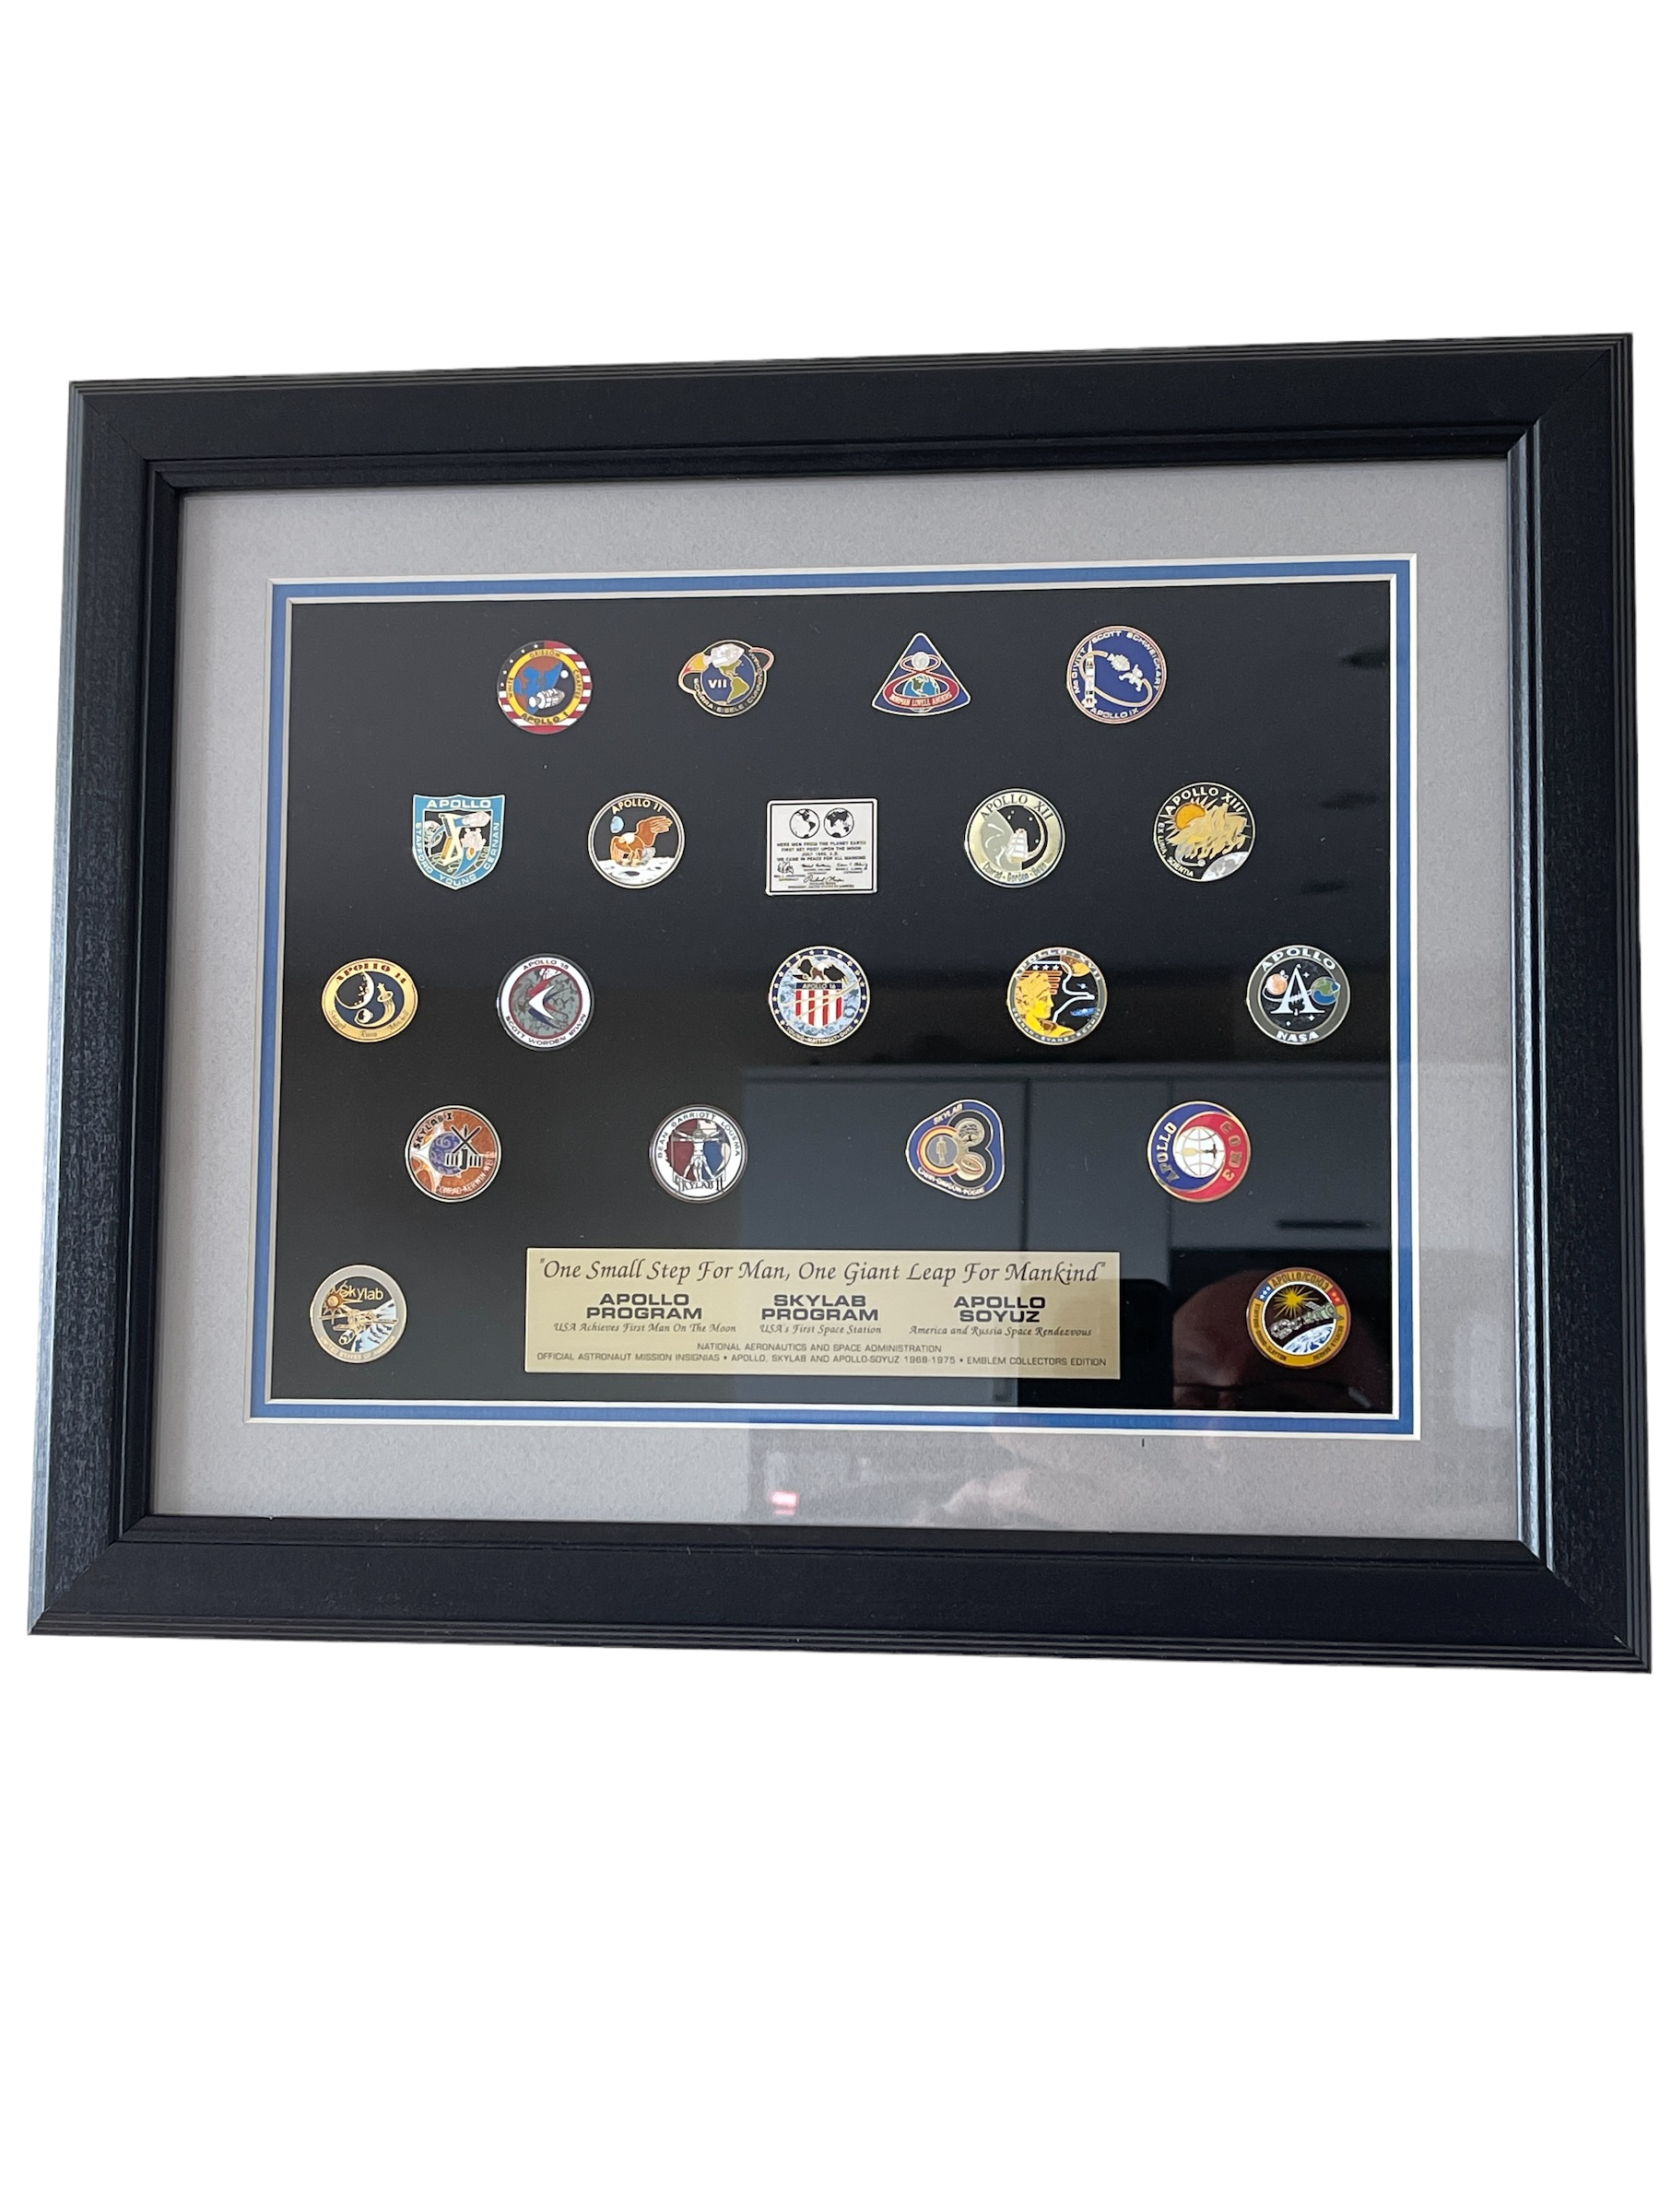 Framed Collection of NASA Pins - "One Small Step for Man, One Giant Leap for Mankind" - Image 3 of 3